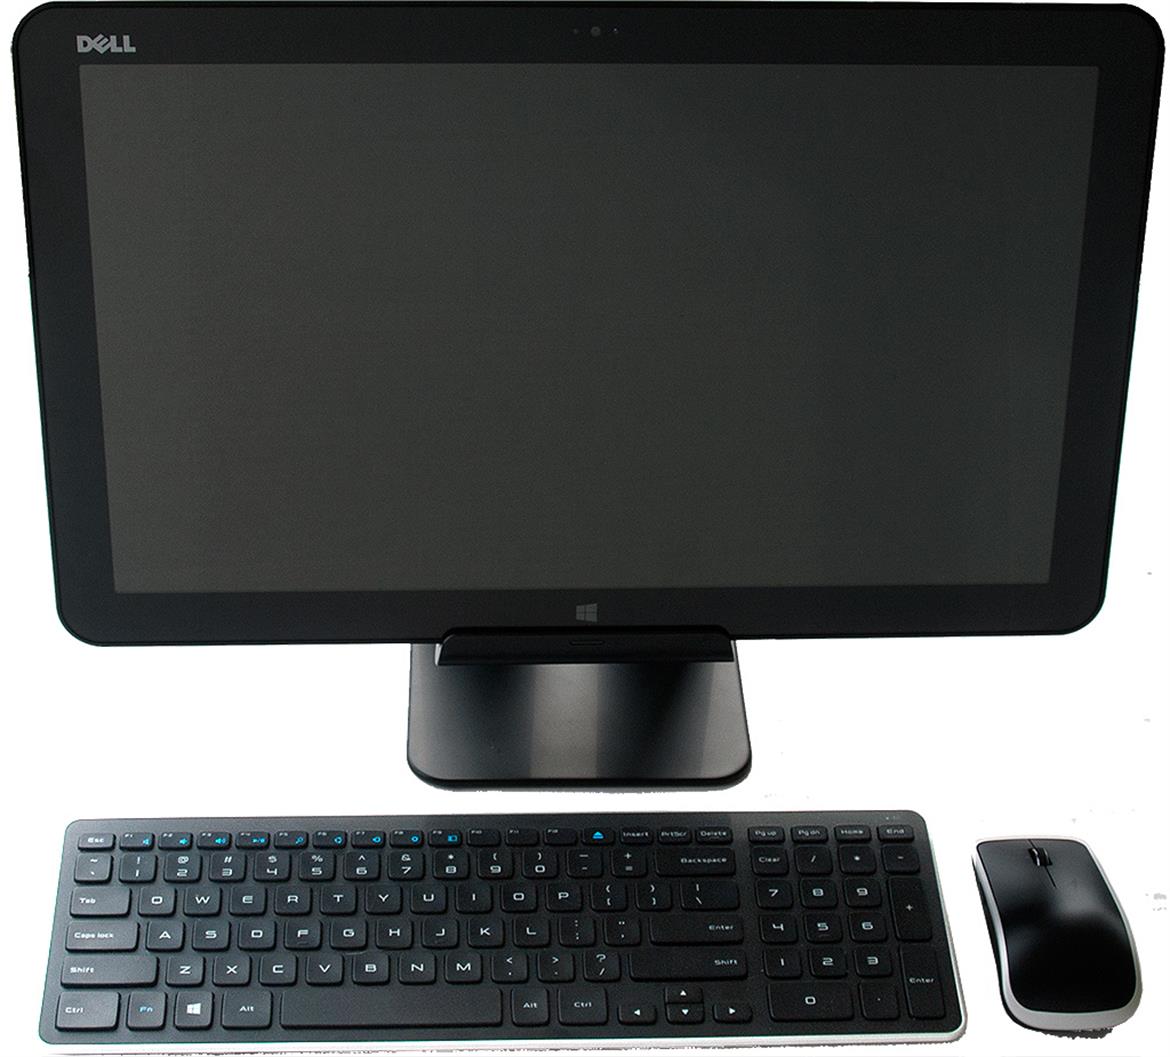 Dell XPS 18 Portable All-in-One: Haswell Reloaded